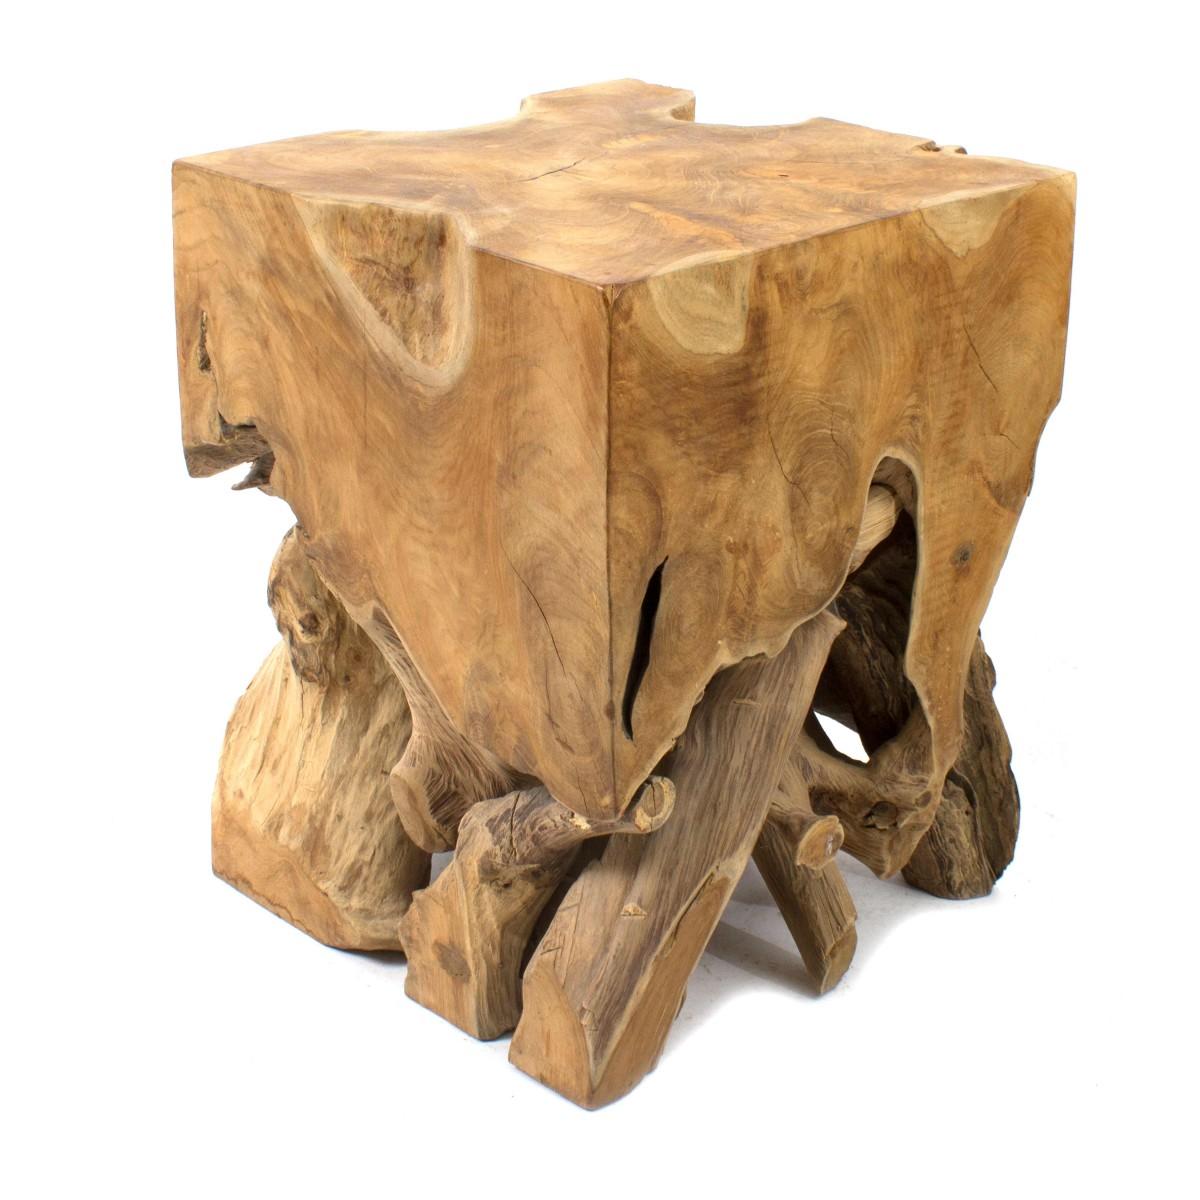 Pair of reclaimed teak root cube end tables. Imported. 

Dimensions: 15.5 inches W x 15.5 inches D x 20 inches H.